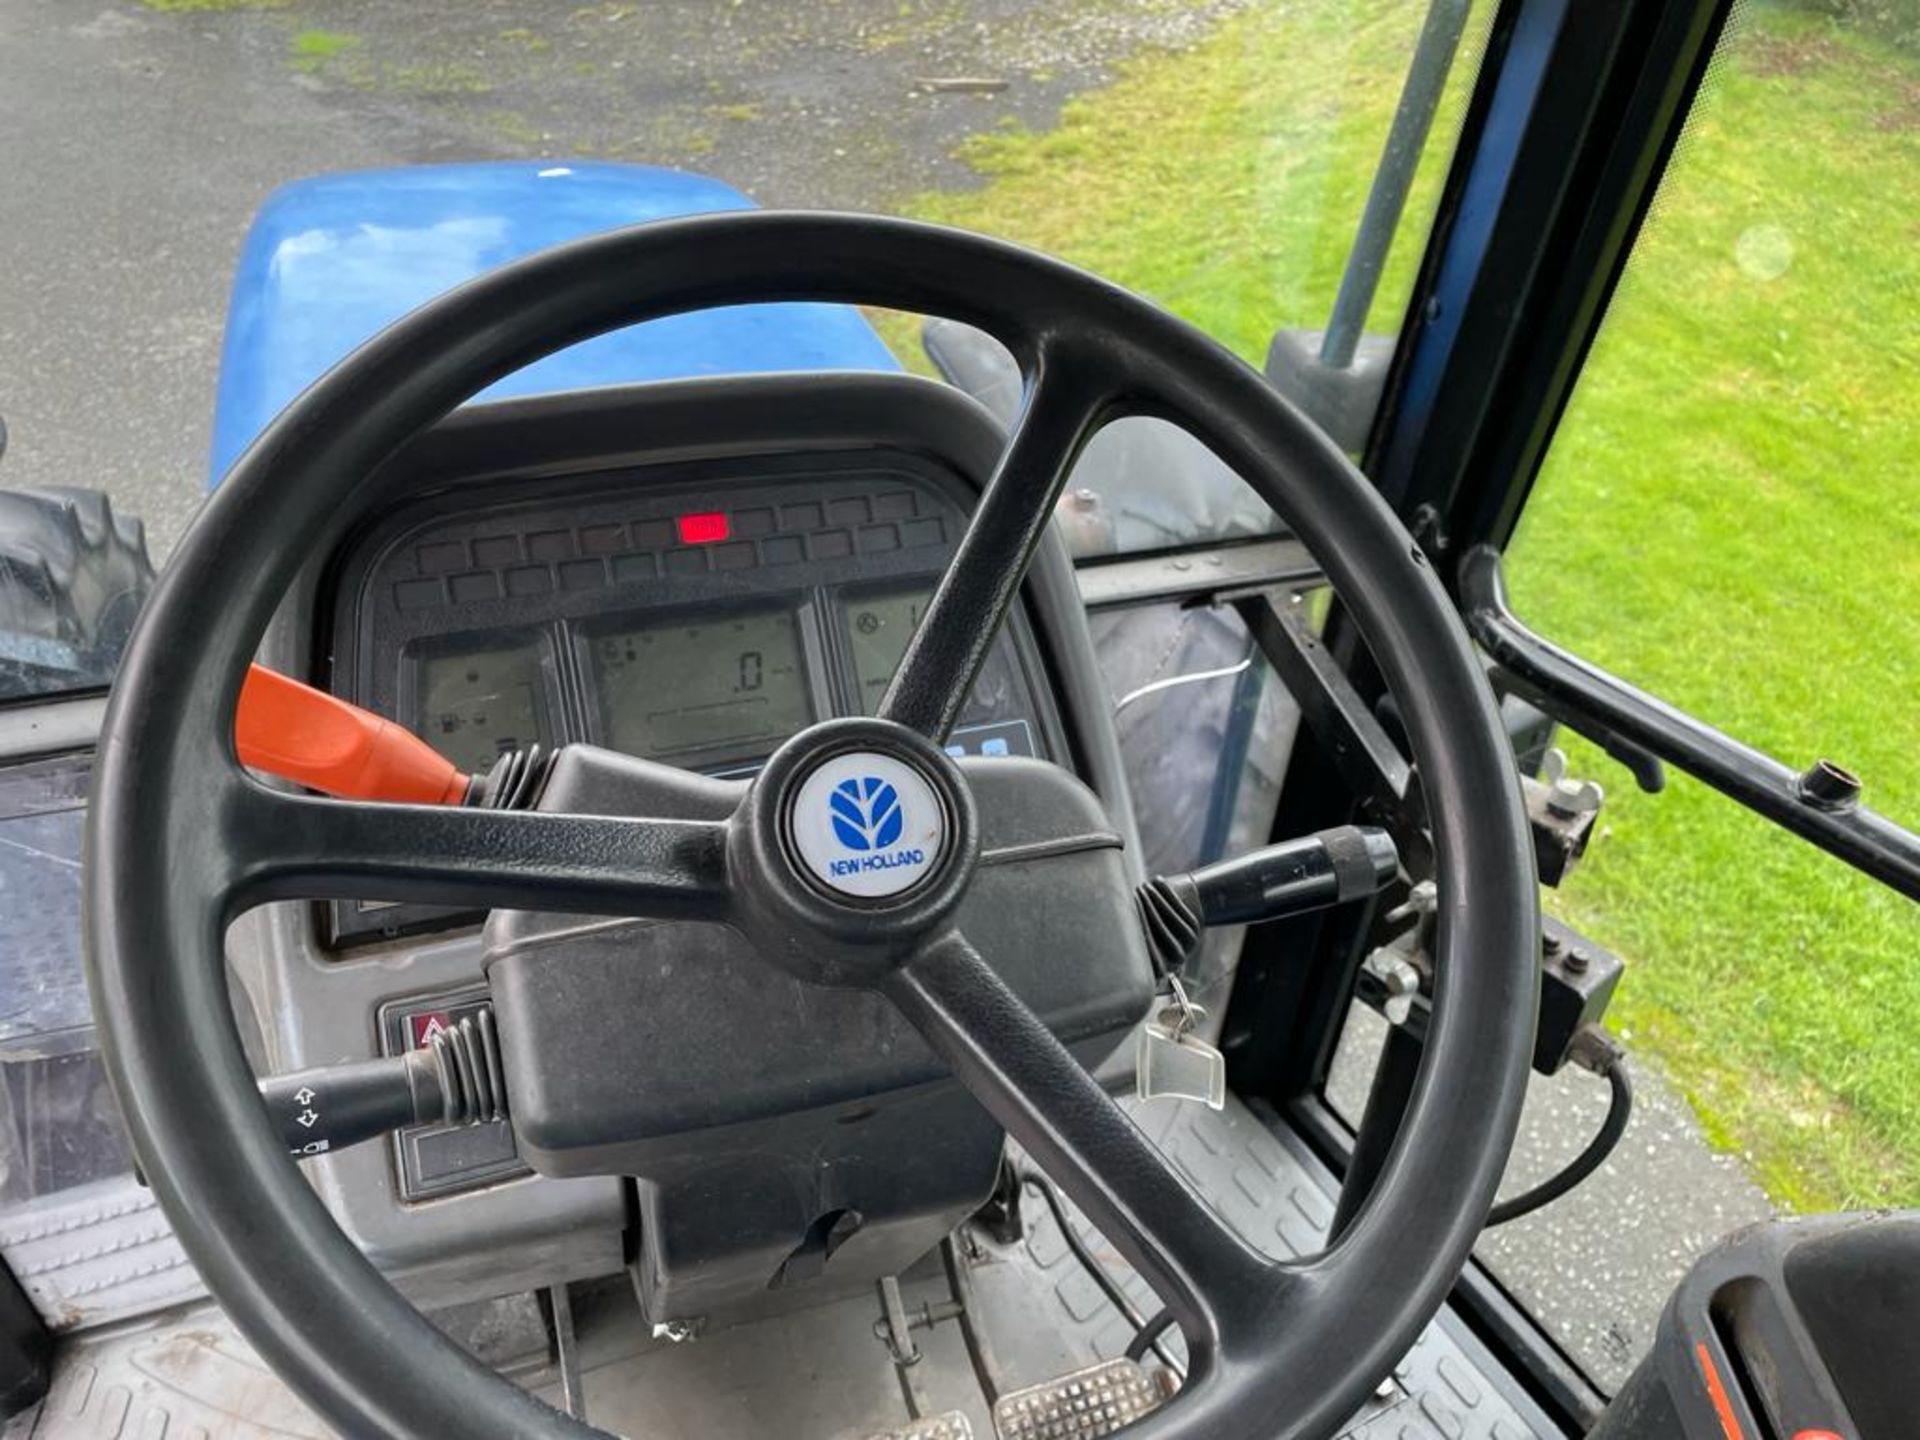 1997 NEW HOLLAND 8360 TRACTOR, APPROX 12000 HOURS, ENGINE GEARBOX AND HYDRAULICS WORKING PERFECTLY - Image 8 of 8